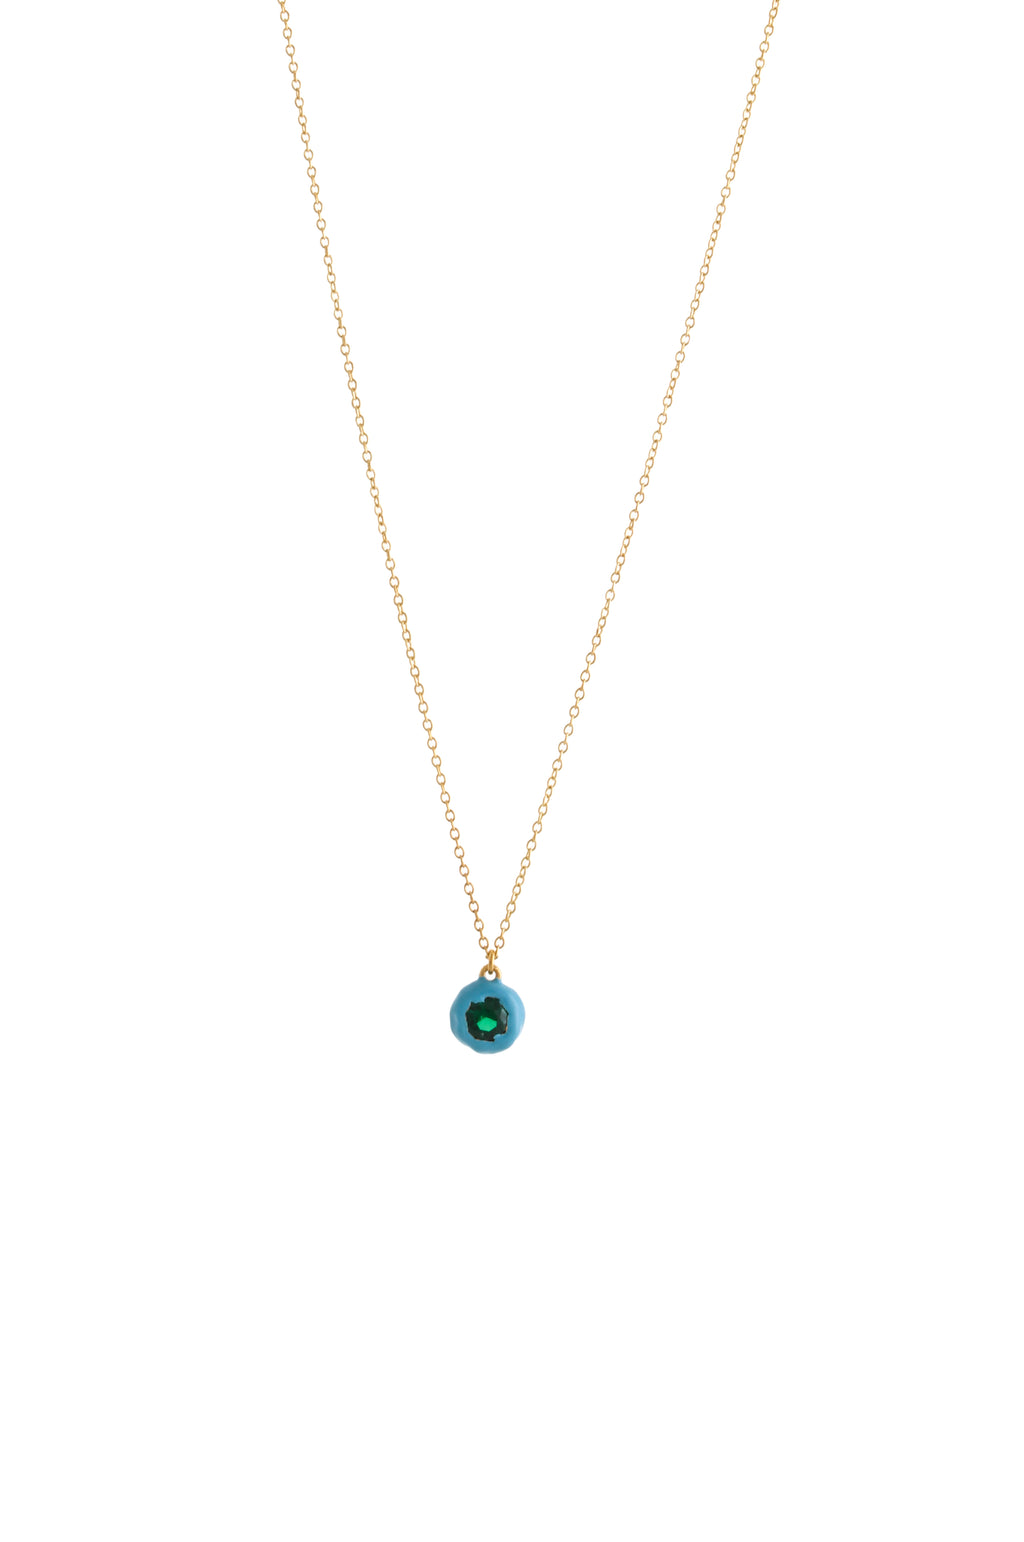 CHAIN PENDANT WITH ENAMEL AND COLORED STONE